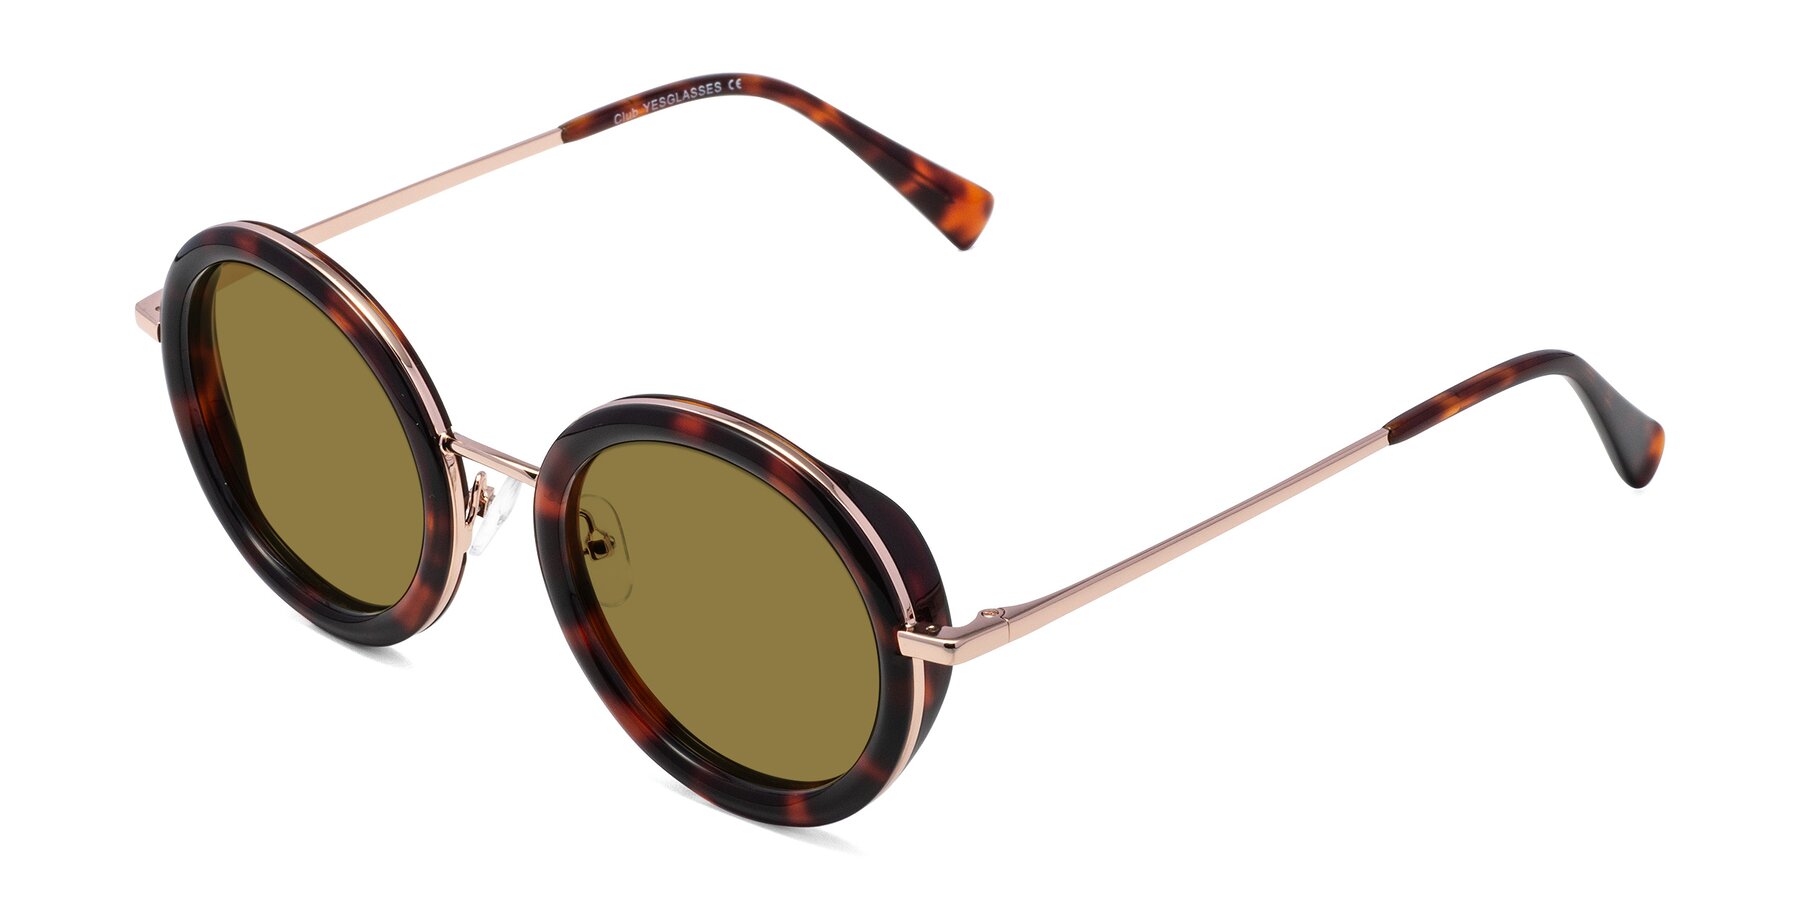 Angle of Club in Tortoise-Rose Gold with Brown Polarized Lenses